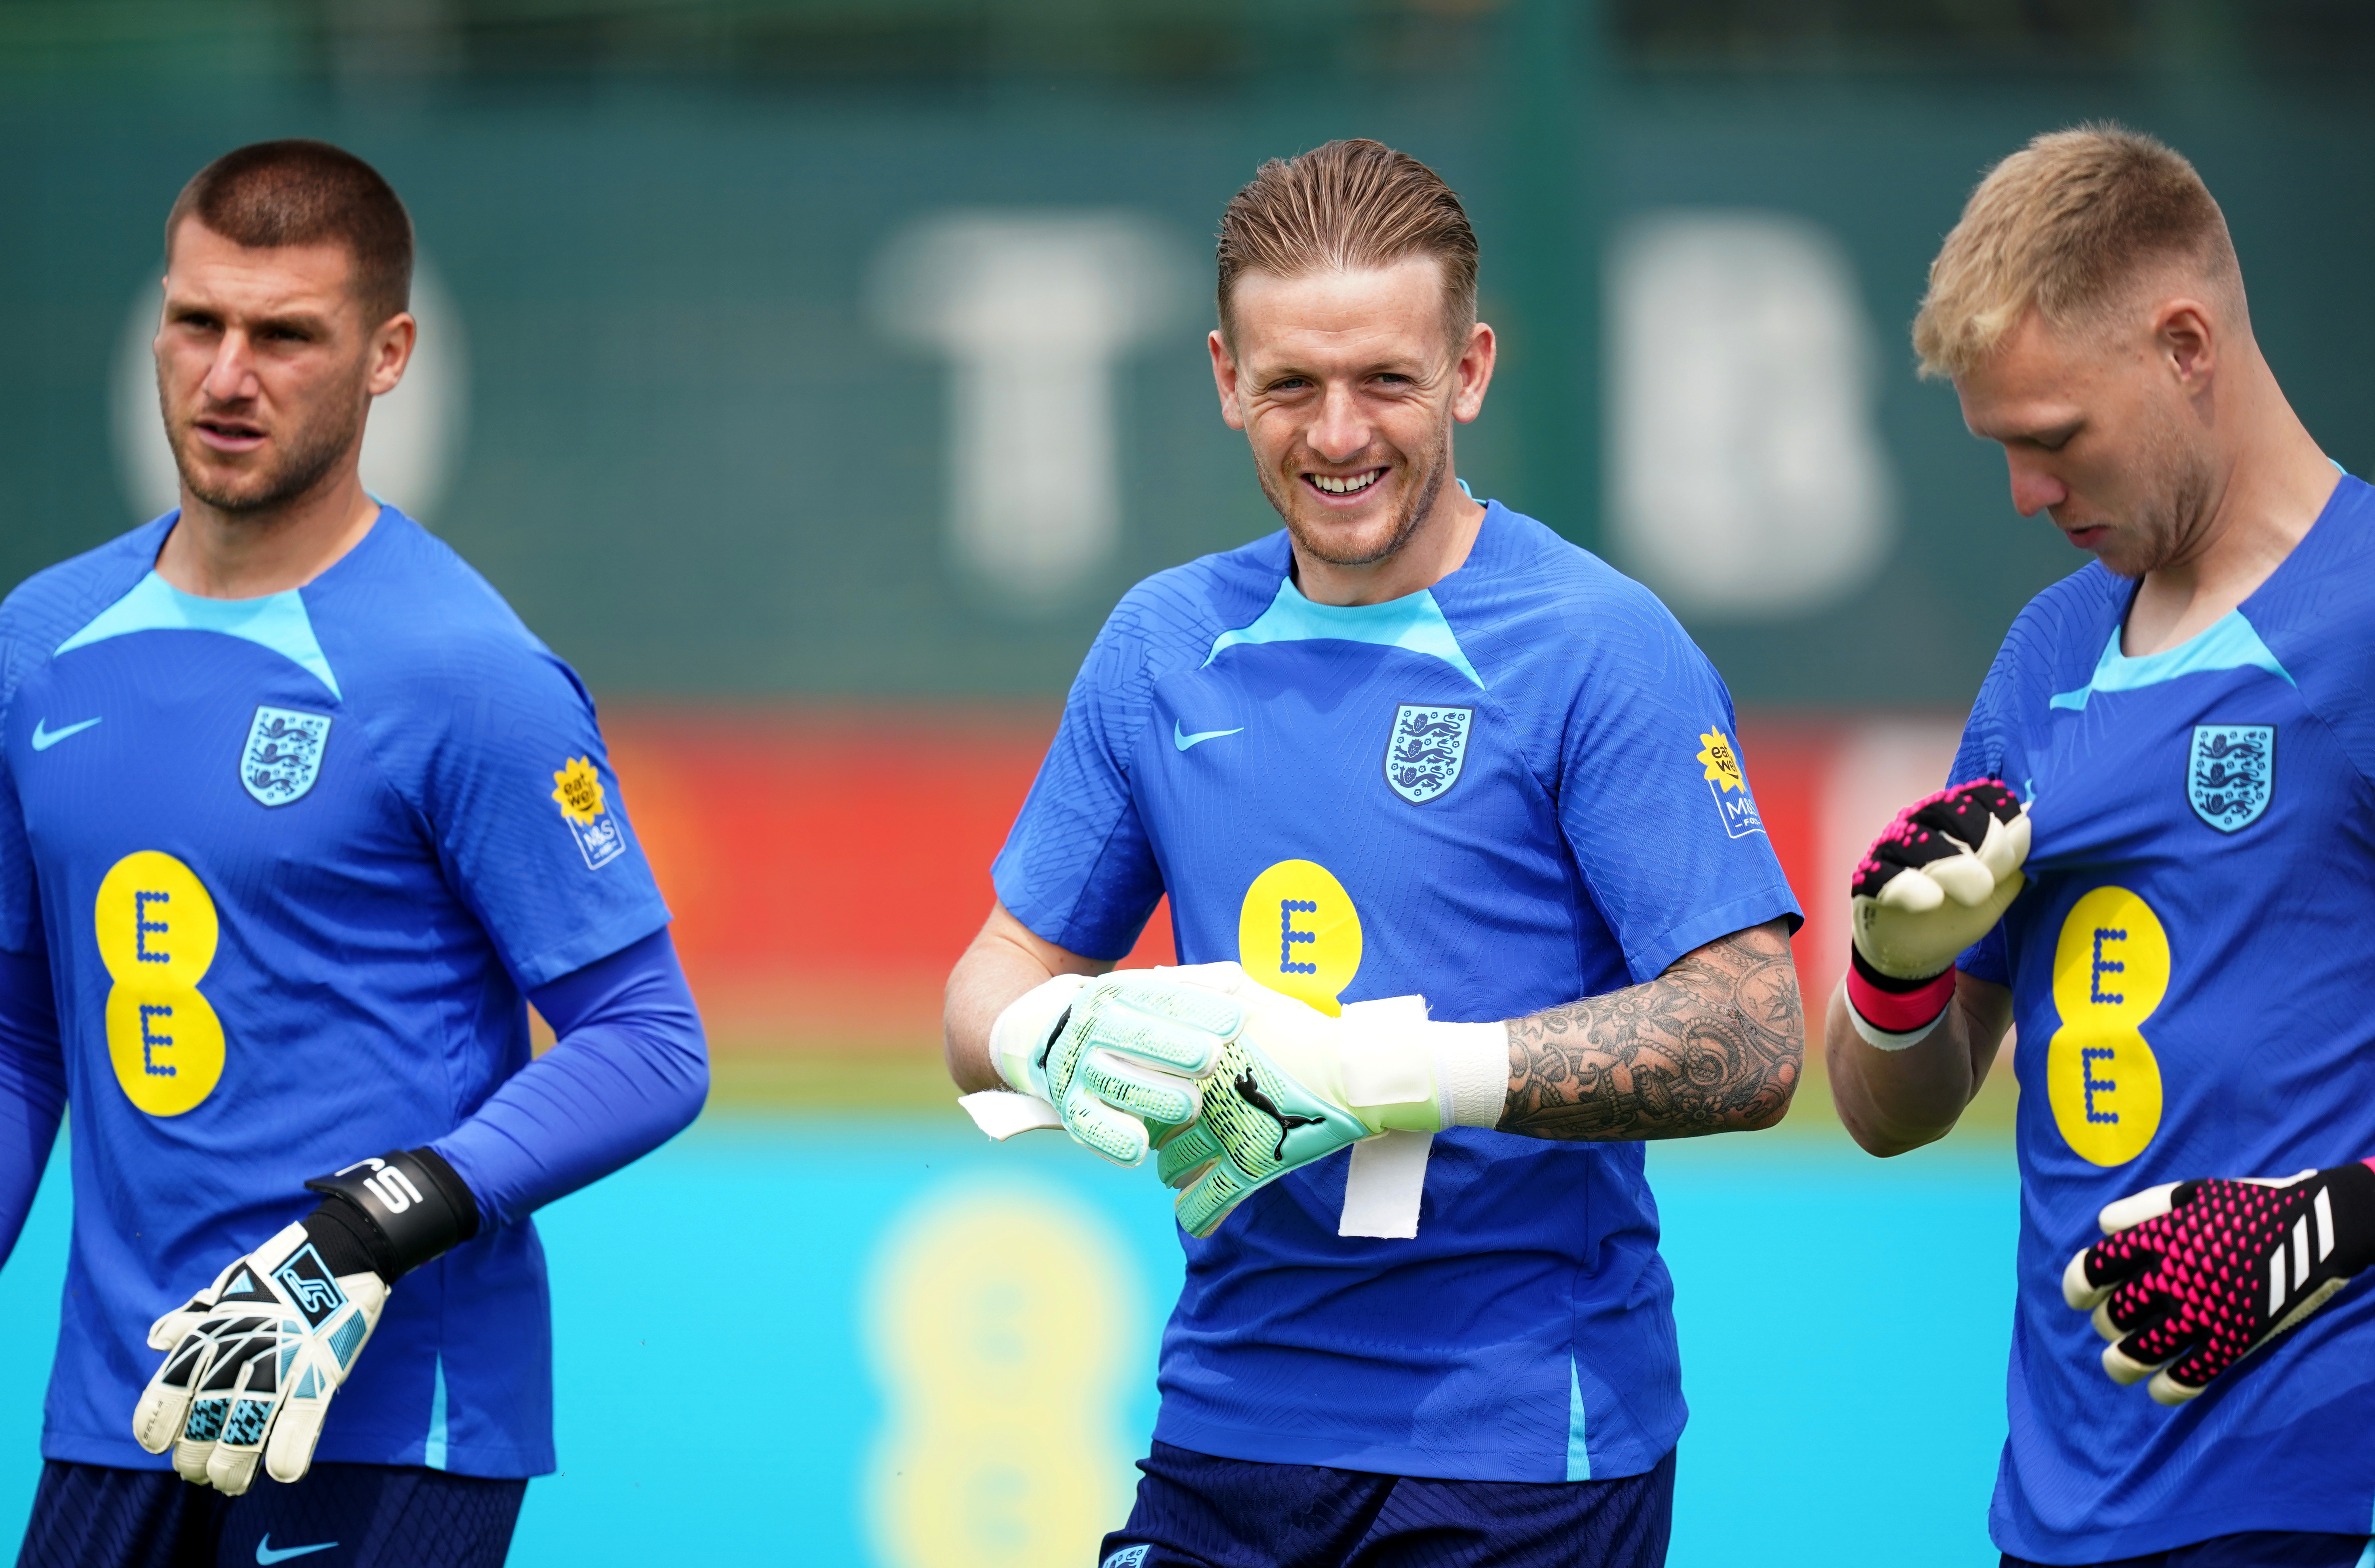 Sam Johnstone, Jordan Pickford and Aaron Ramsdale have been England's goalkeeping trio recently